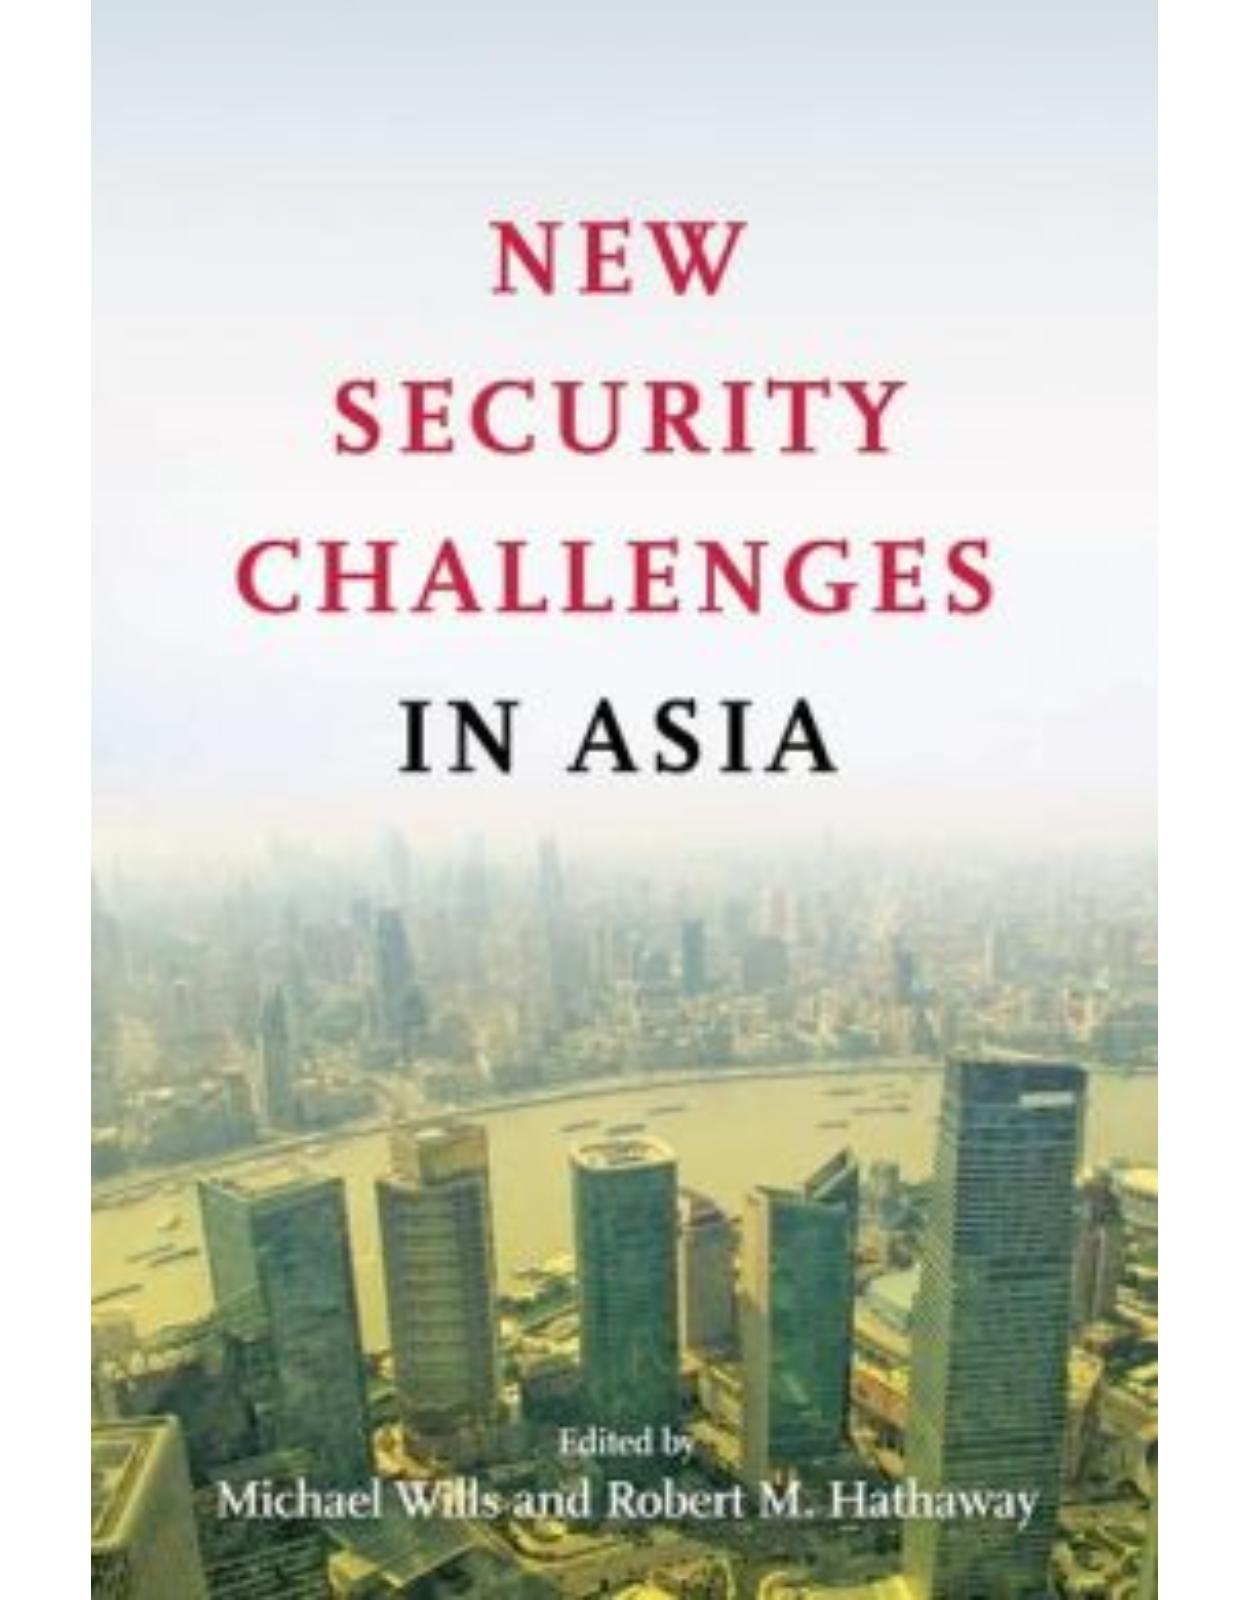 New Security Challenges in Asia.